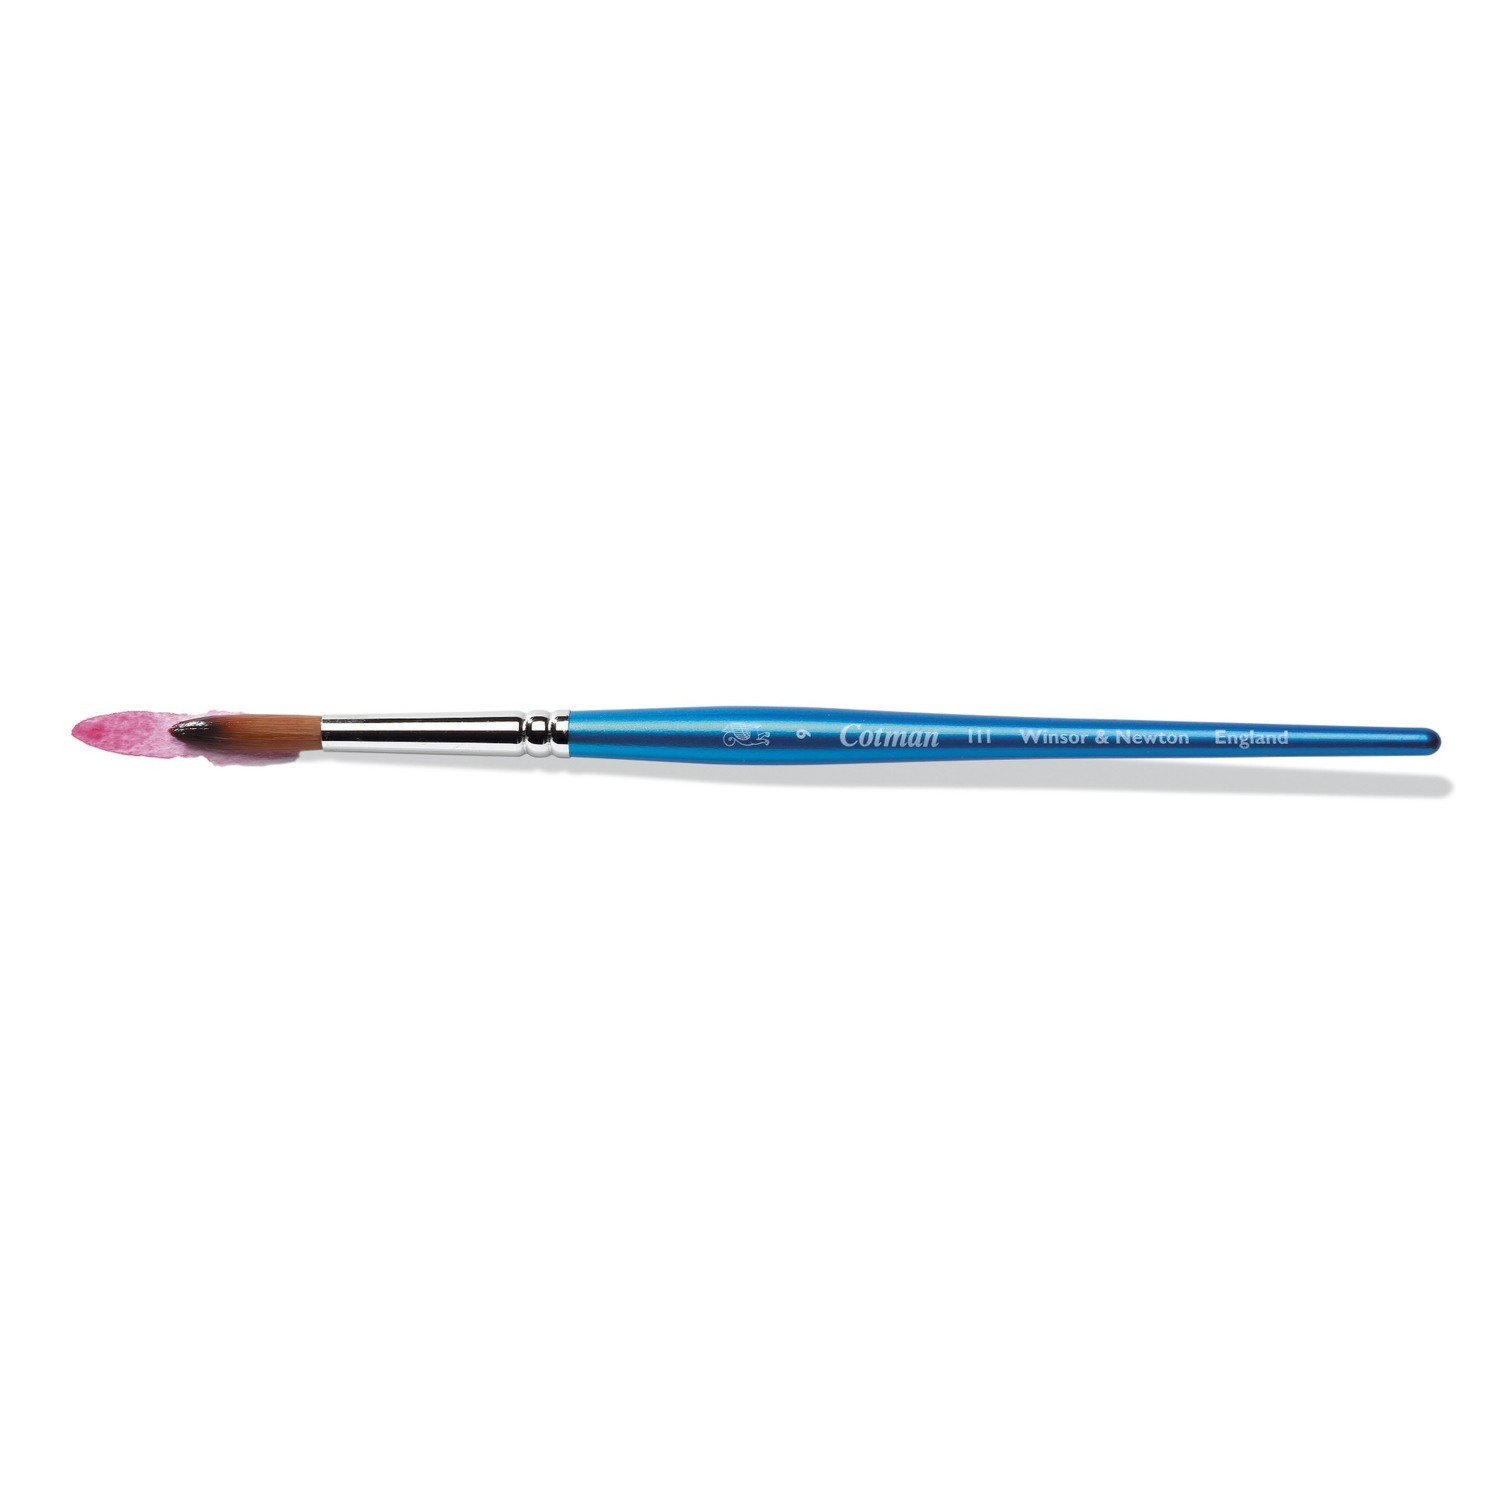 Winsor and Newton Cotman Watercolour Series 111 Designers' Brushes - No. 9 Image 3